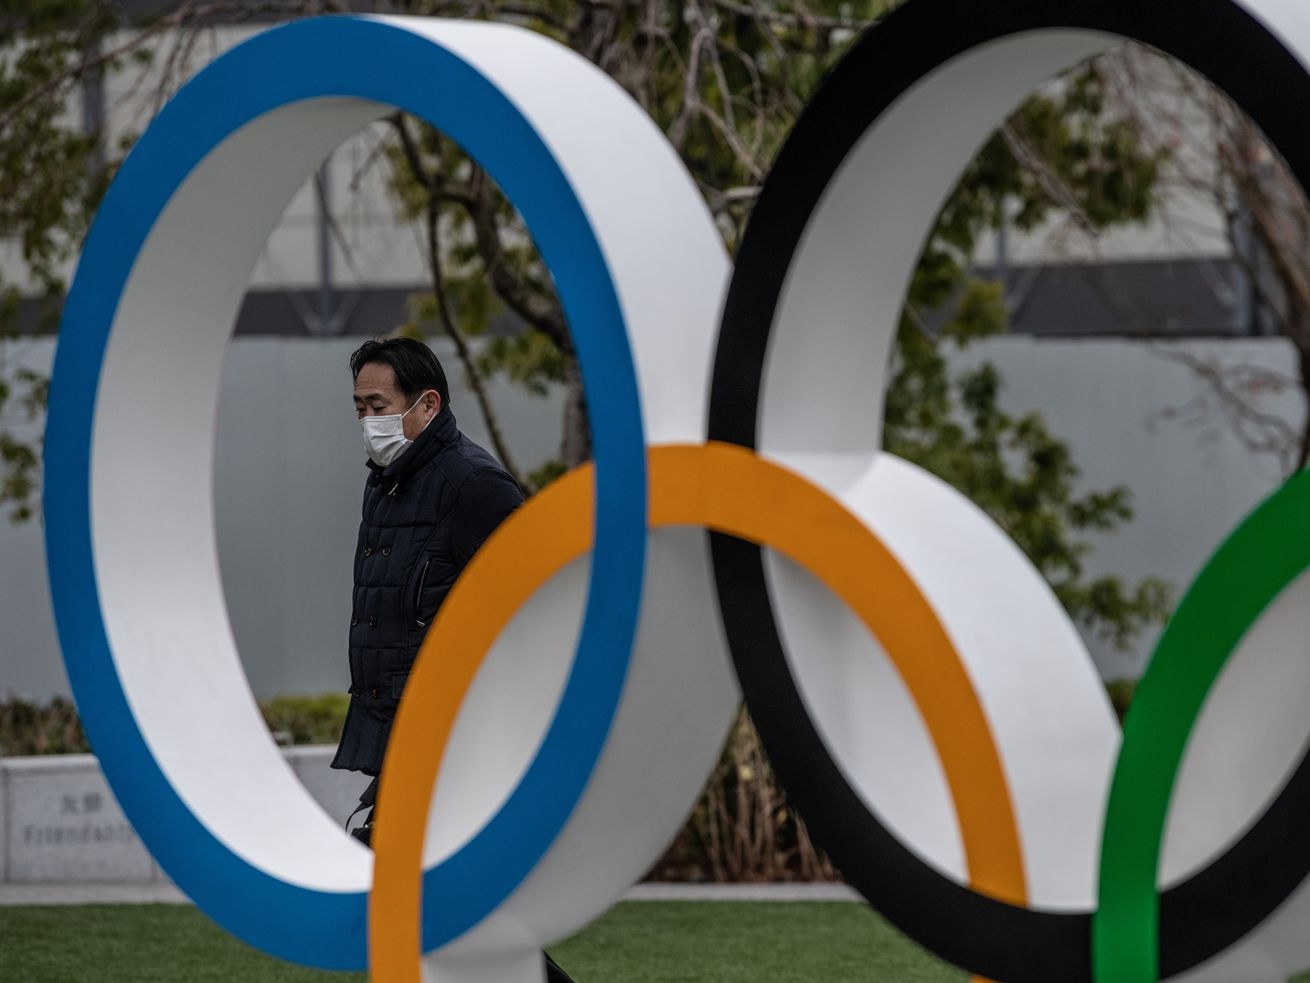 The picture is a closeup of a statue featuring the Olympic Rings in Tokyo. A man is pictured walking by wearing a mask to protect from the coronavirus With the Olympics just a few short weeks away, and dependent on a successful vaccine drive, the mood is pretty gloomy.